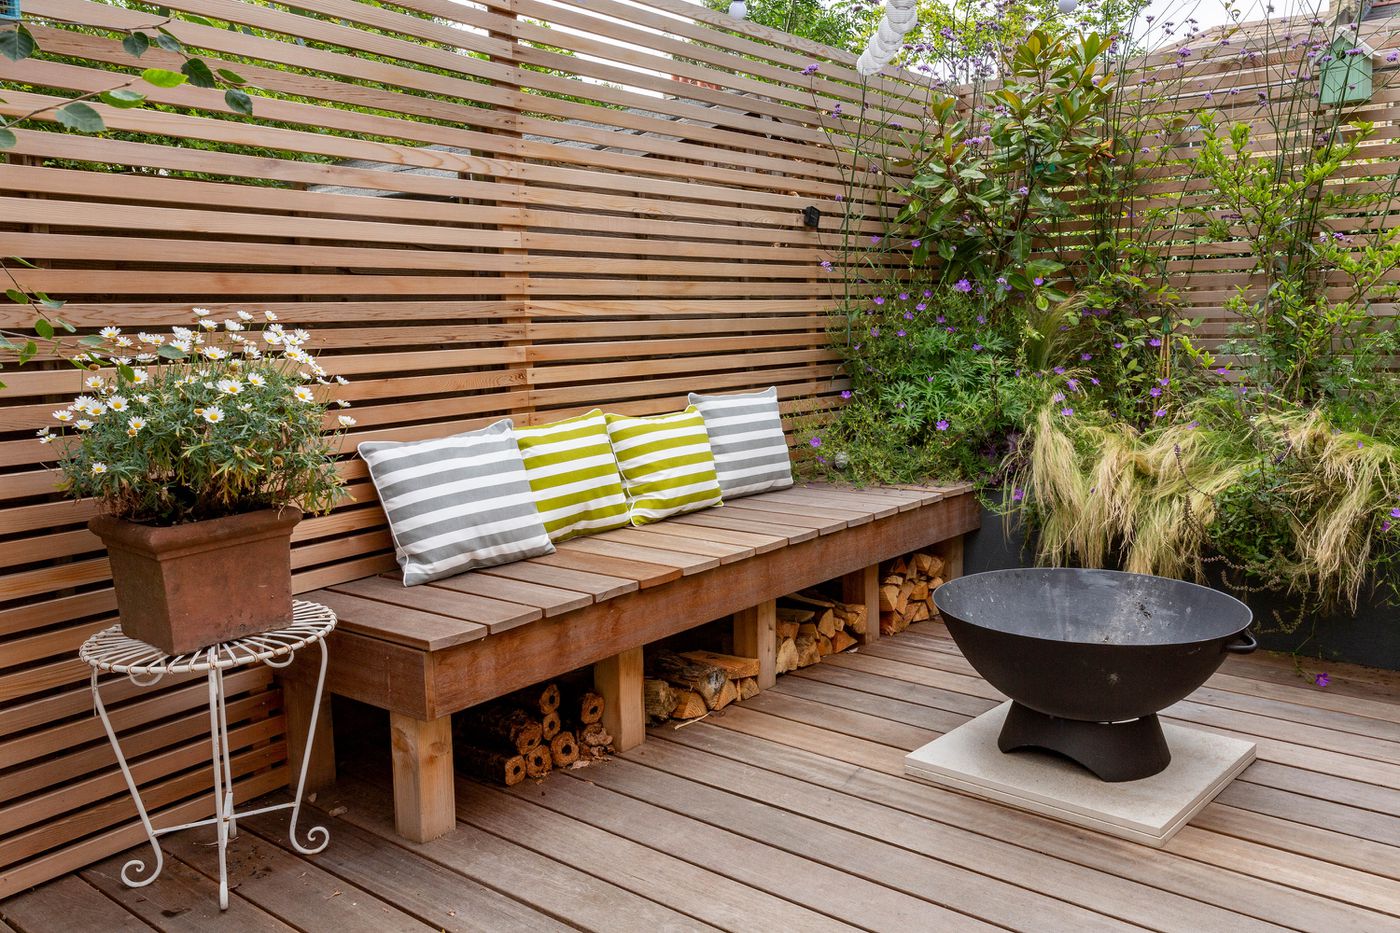 Small decking ideas with a built-in bench